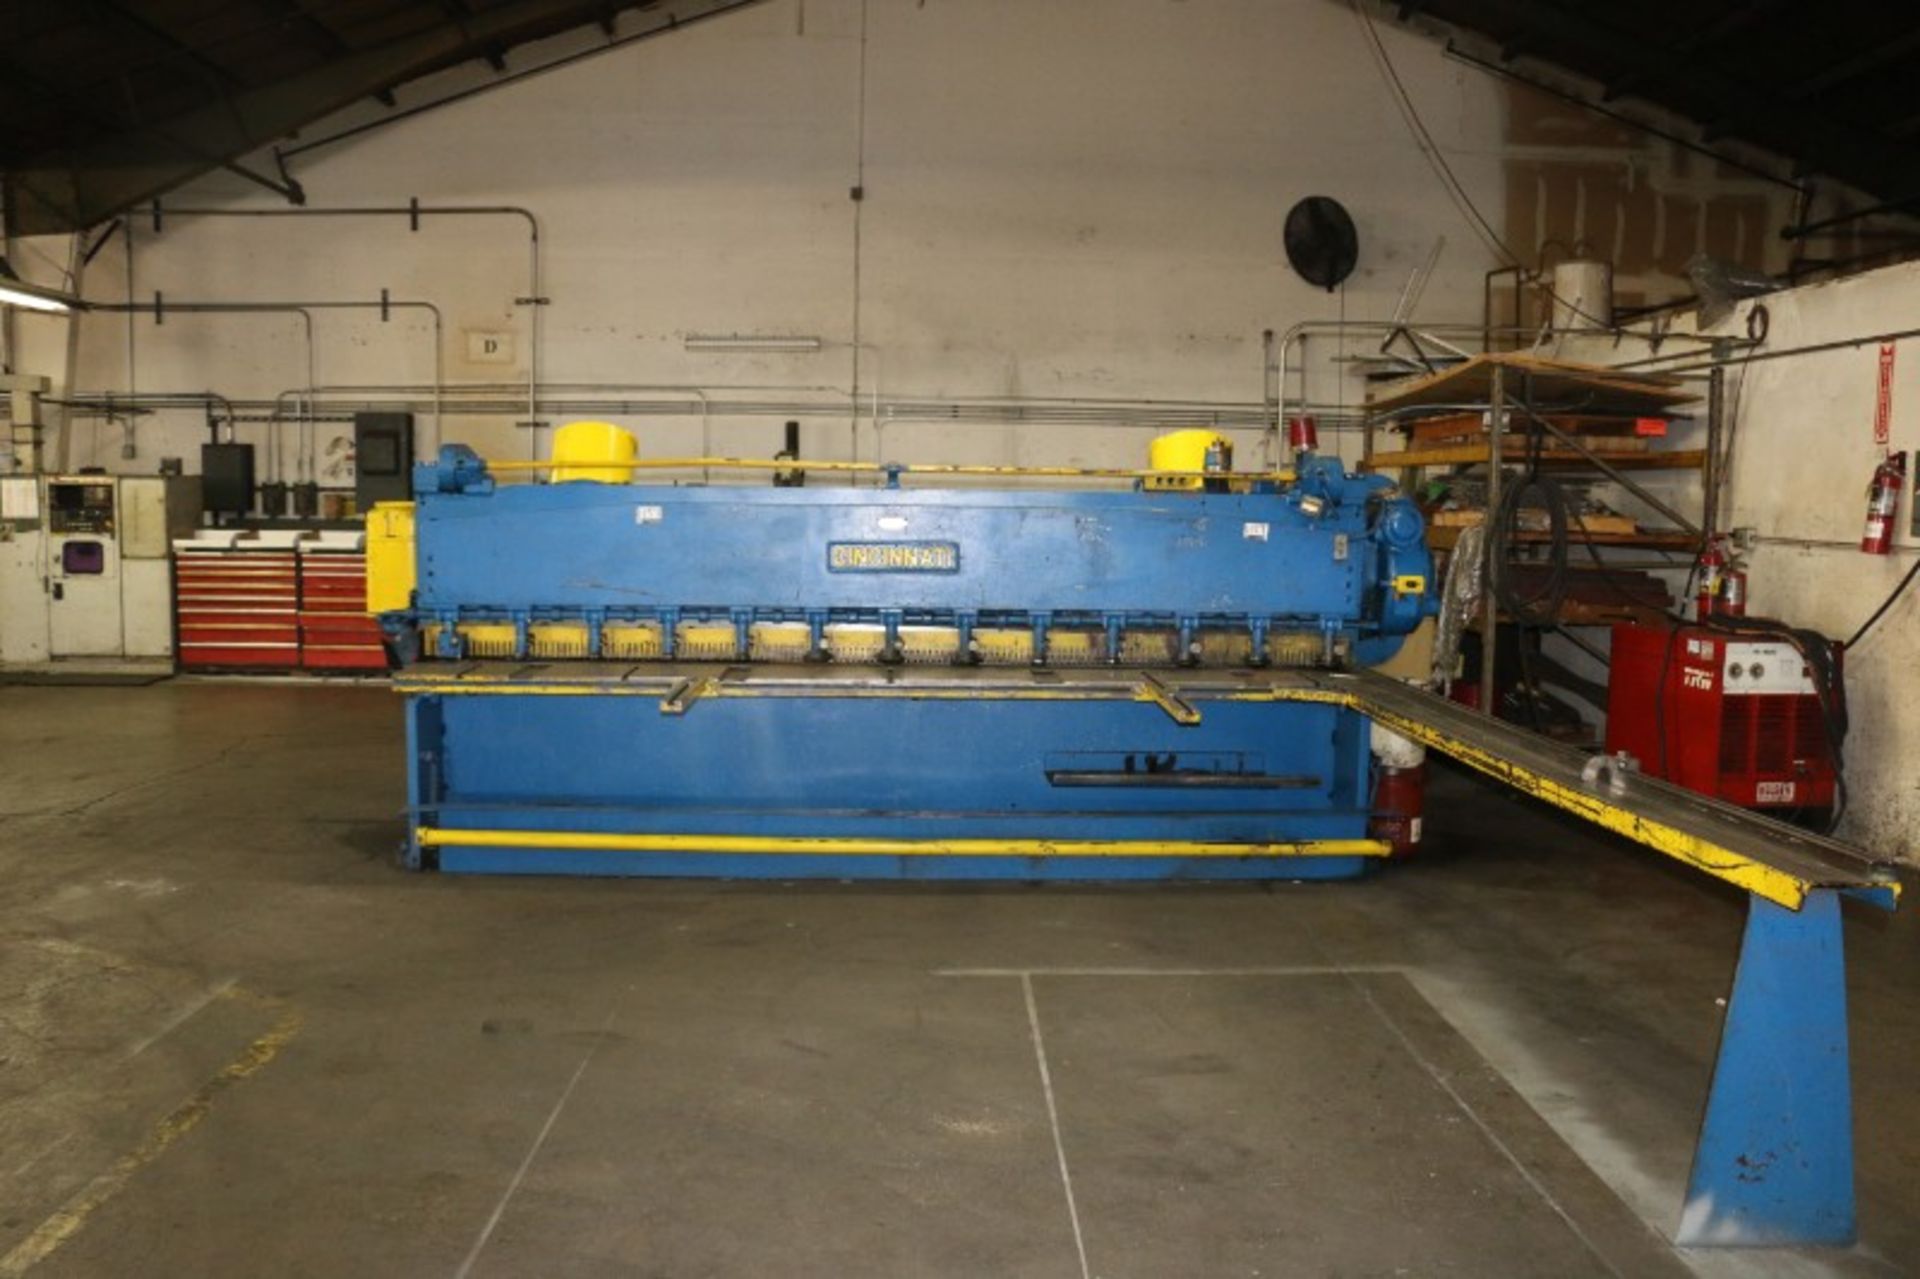 Cincinnati Model 1412 Mechanical Shear Equipped with Squaring Arm, Support Arms, S/N 13299 - Image 3 of 9